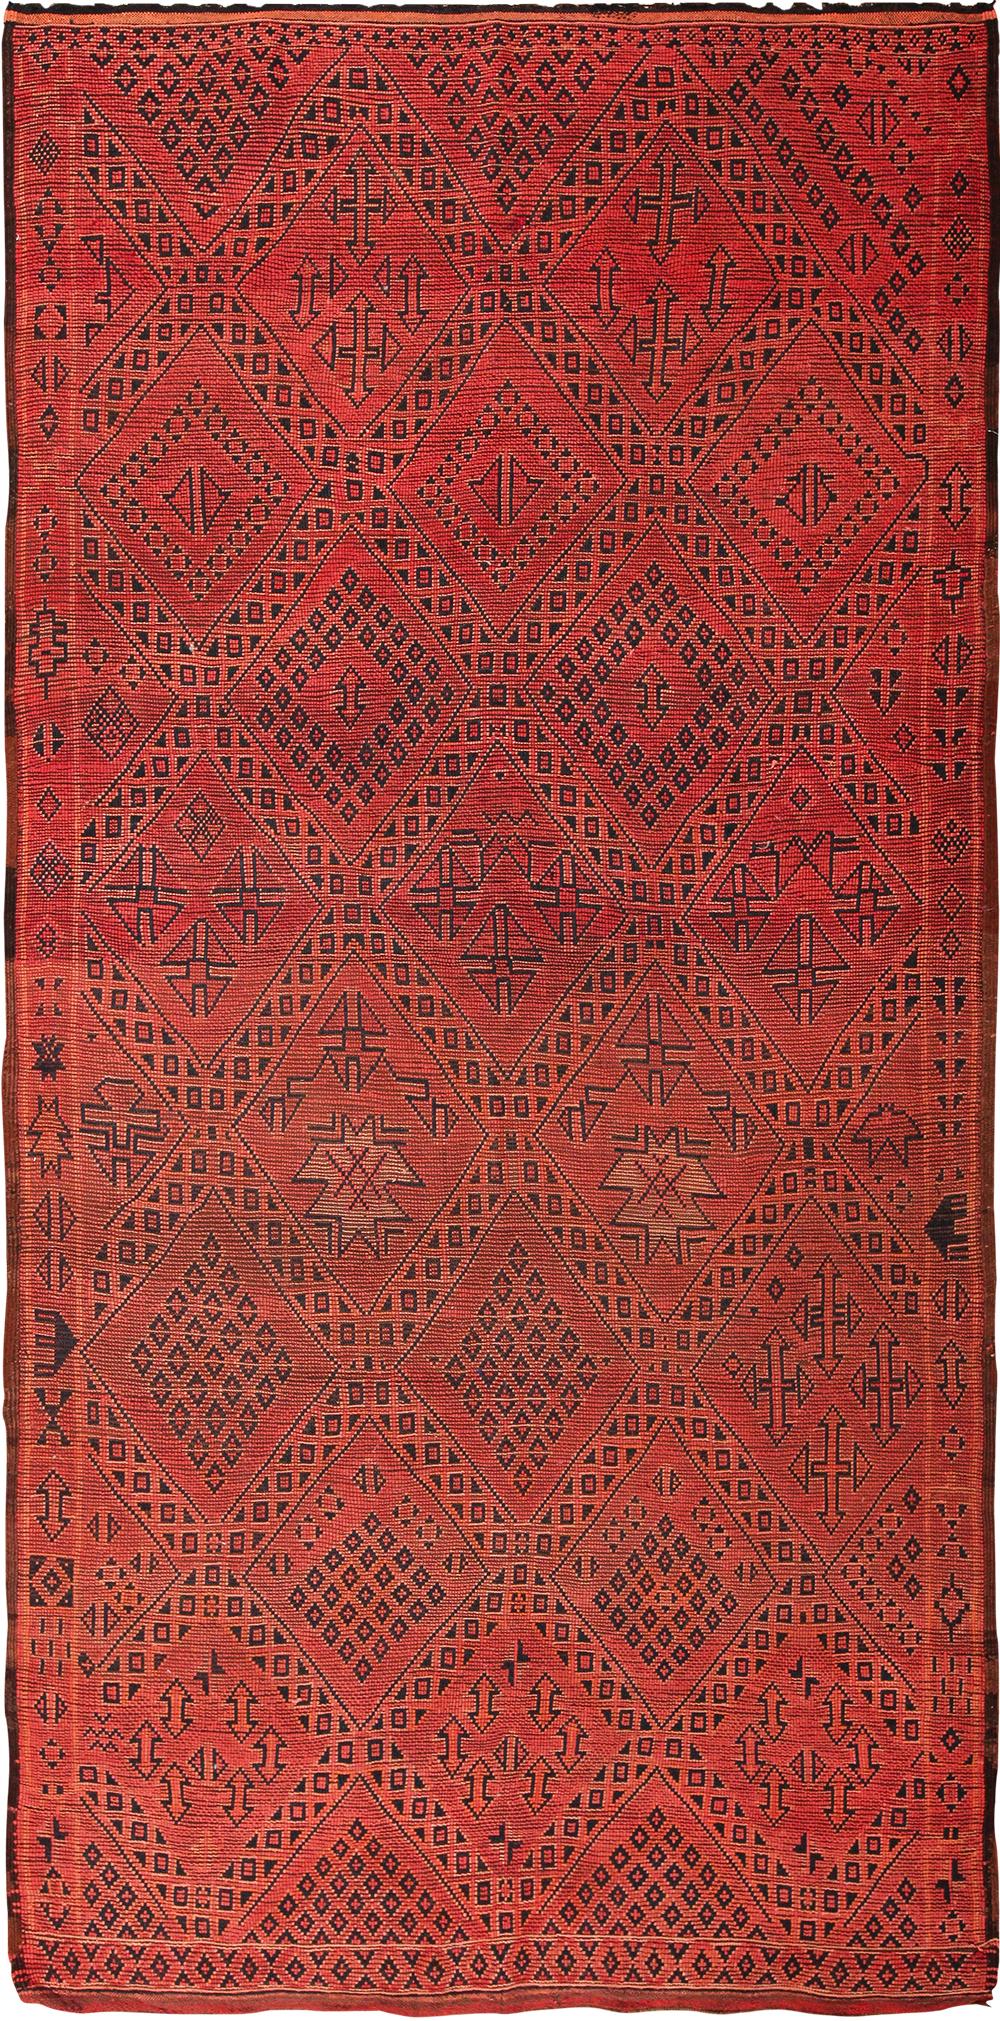 Beautiful and captivating Vintage Gallery Size Double Sided Red Berber Moroccan Rug, Country of Origin / Rug Type: Morocco, Circa Date: Mid – 20th Century. Size: 6 ft x 12 ft 4 in (1.83 m x 3.76 m)

This spectacular wide hallway gallery size double